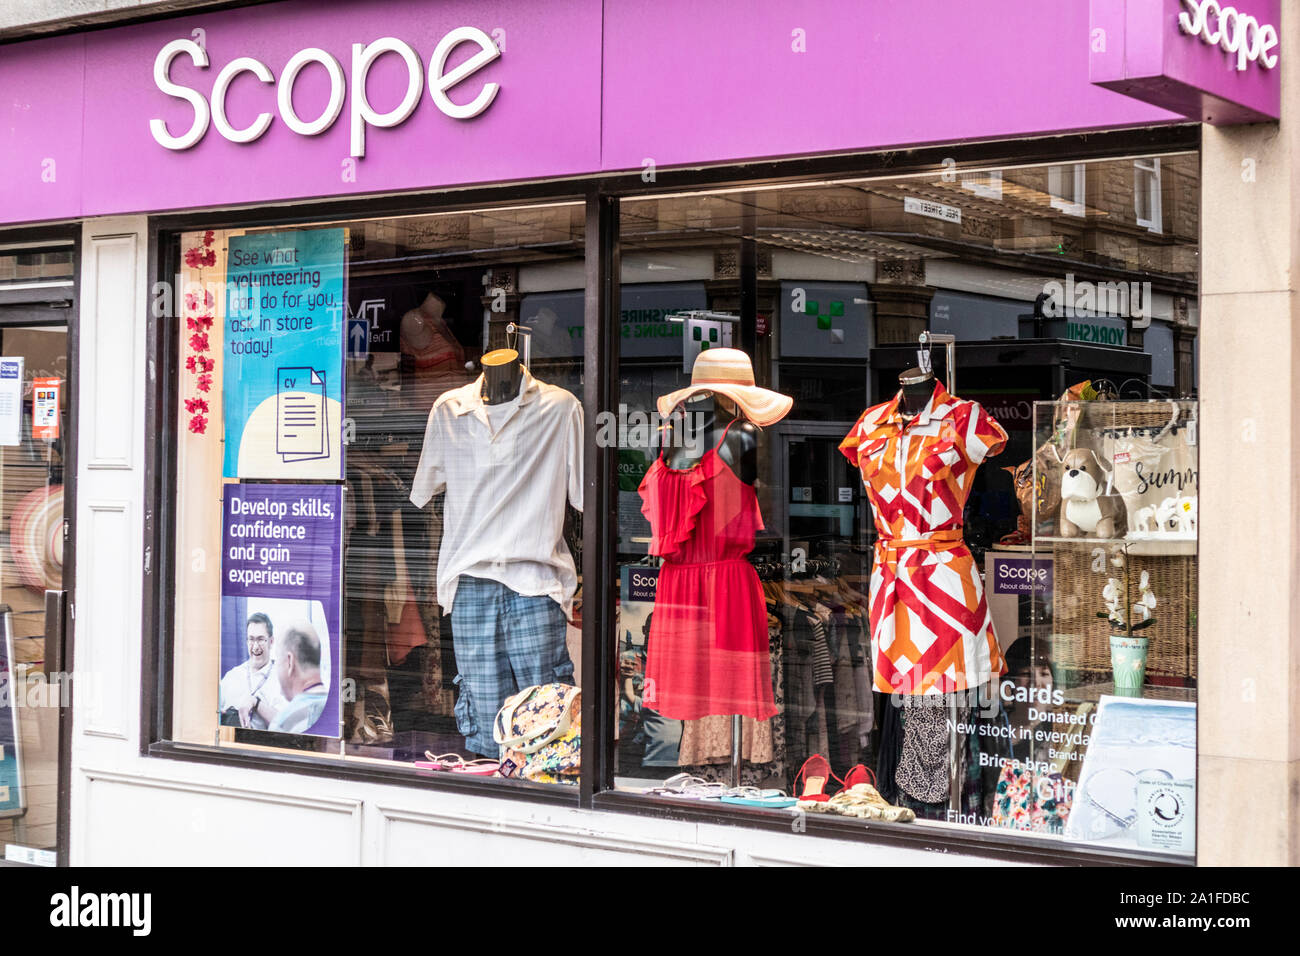 The Scope charity shop in Morley, Leeds, West Yorkshire UK Stock Photo